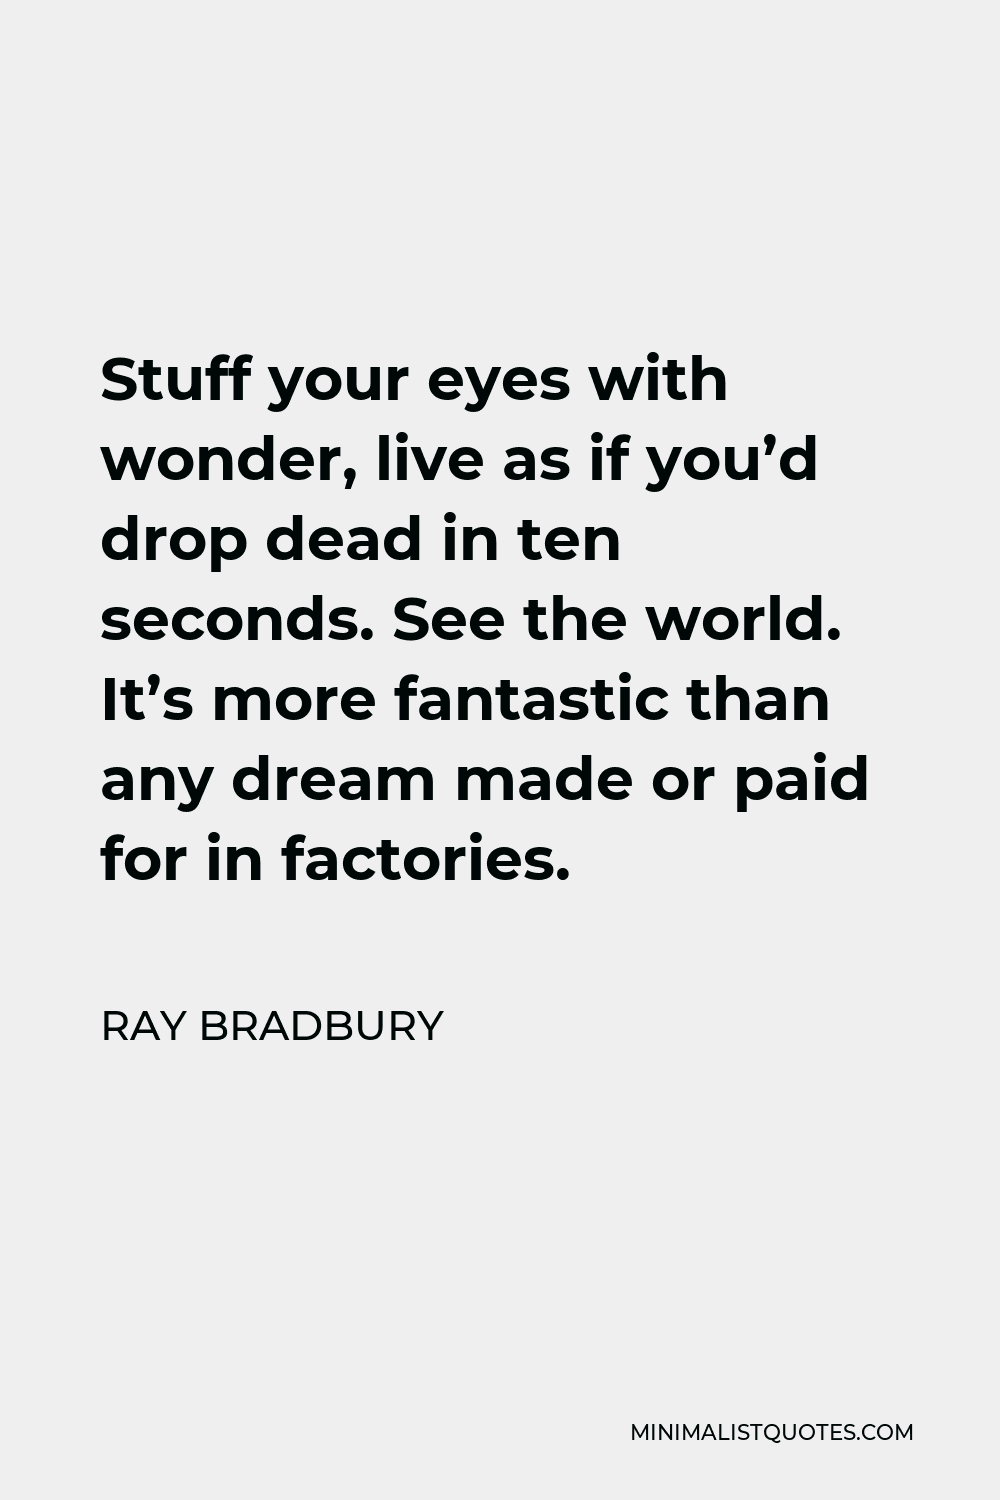 Ray Bradbury Quote - Stuff your eyes with wonder, live as if you’d drop dead in ten seconds. See the world. It’s more fantastic than any dream made or paid for in factories.